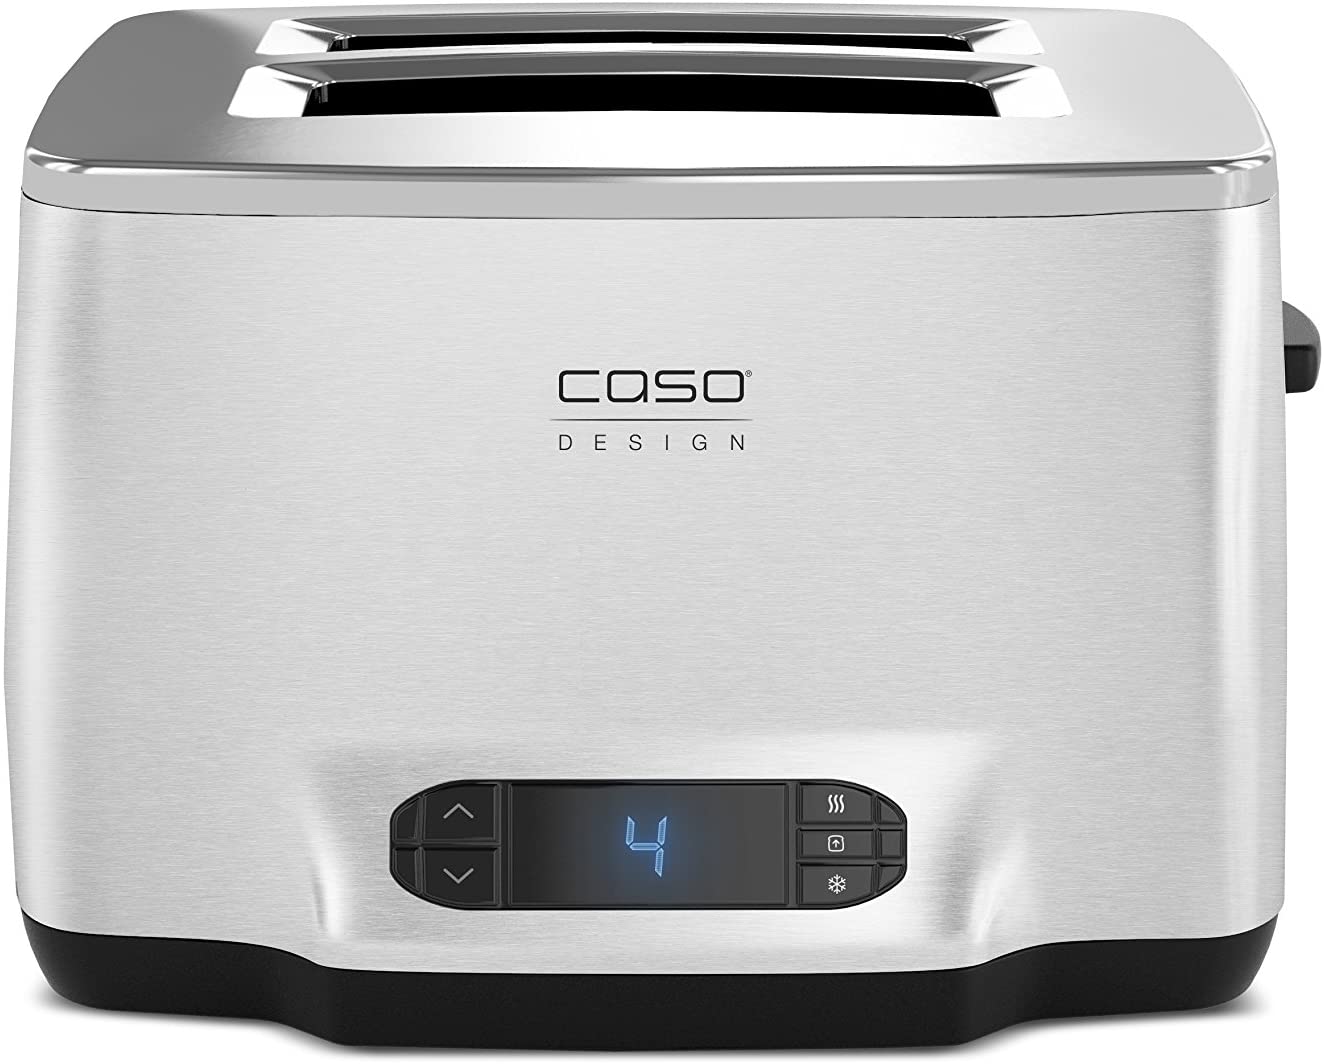 Caso 2778 Inox 2 Design Toaster, 2 Slices Made of High-Quality Stainless Steel, Toast Automatic, Extra Large LCD Display, 1000 W, Silver